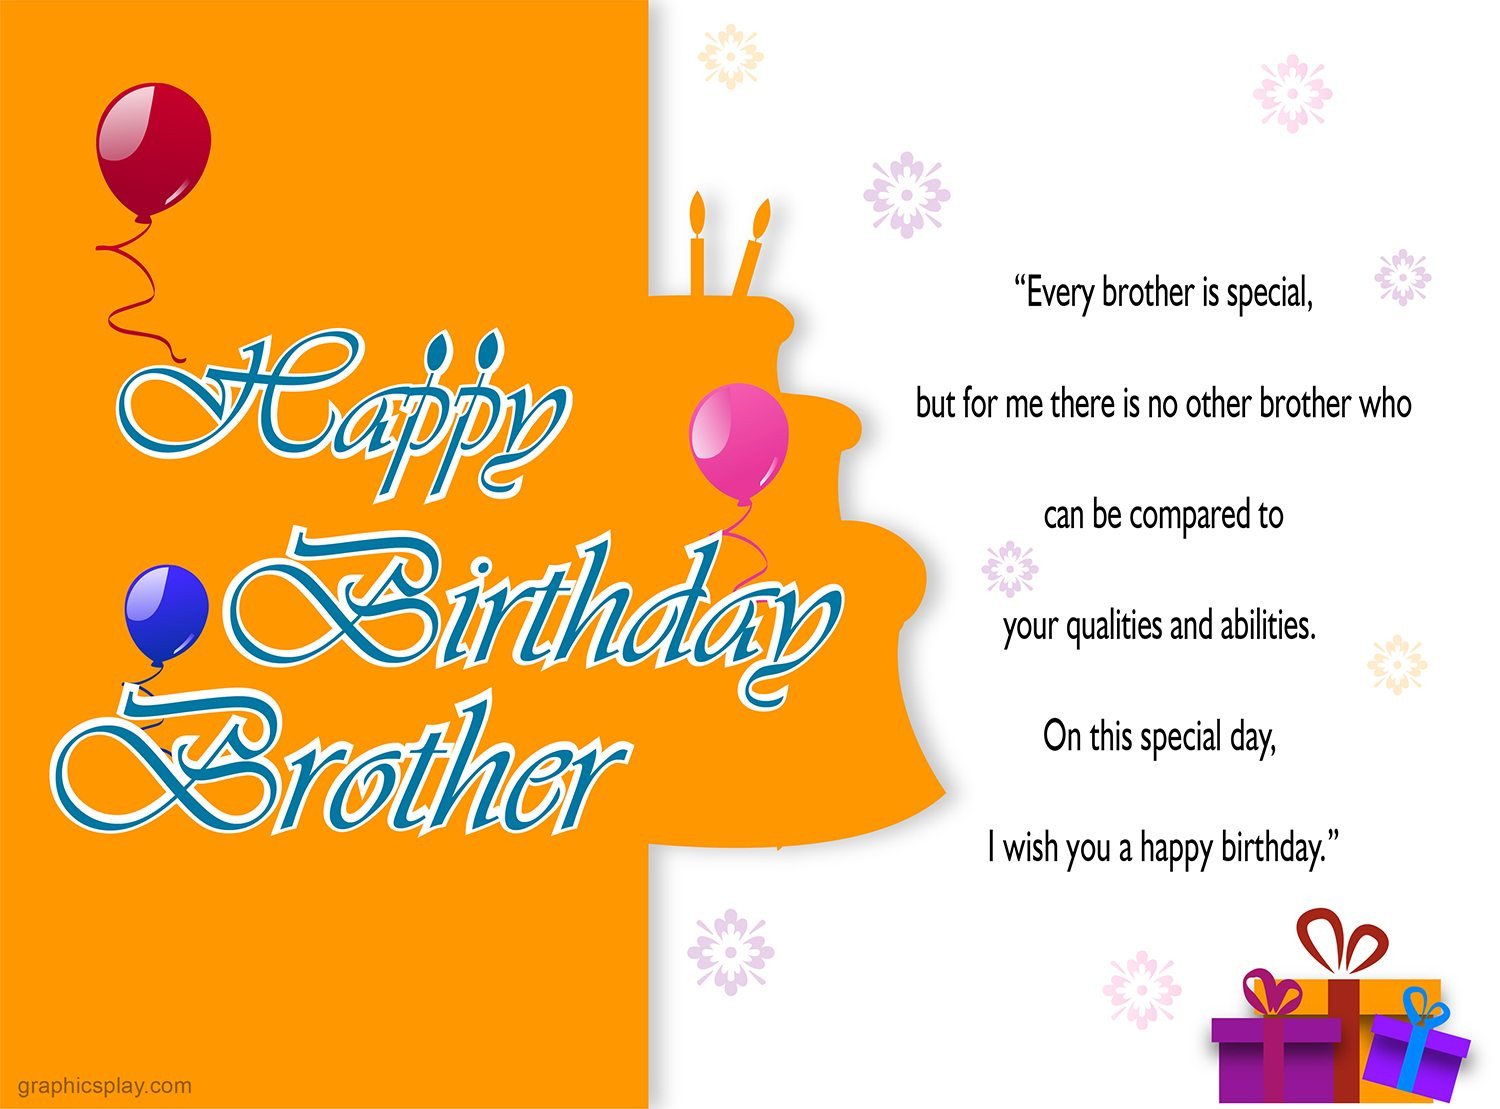 Happy Birthday Brother Quote
 Happy Birthday Brother Greeting with Quotes GraphicsPlay